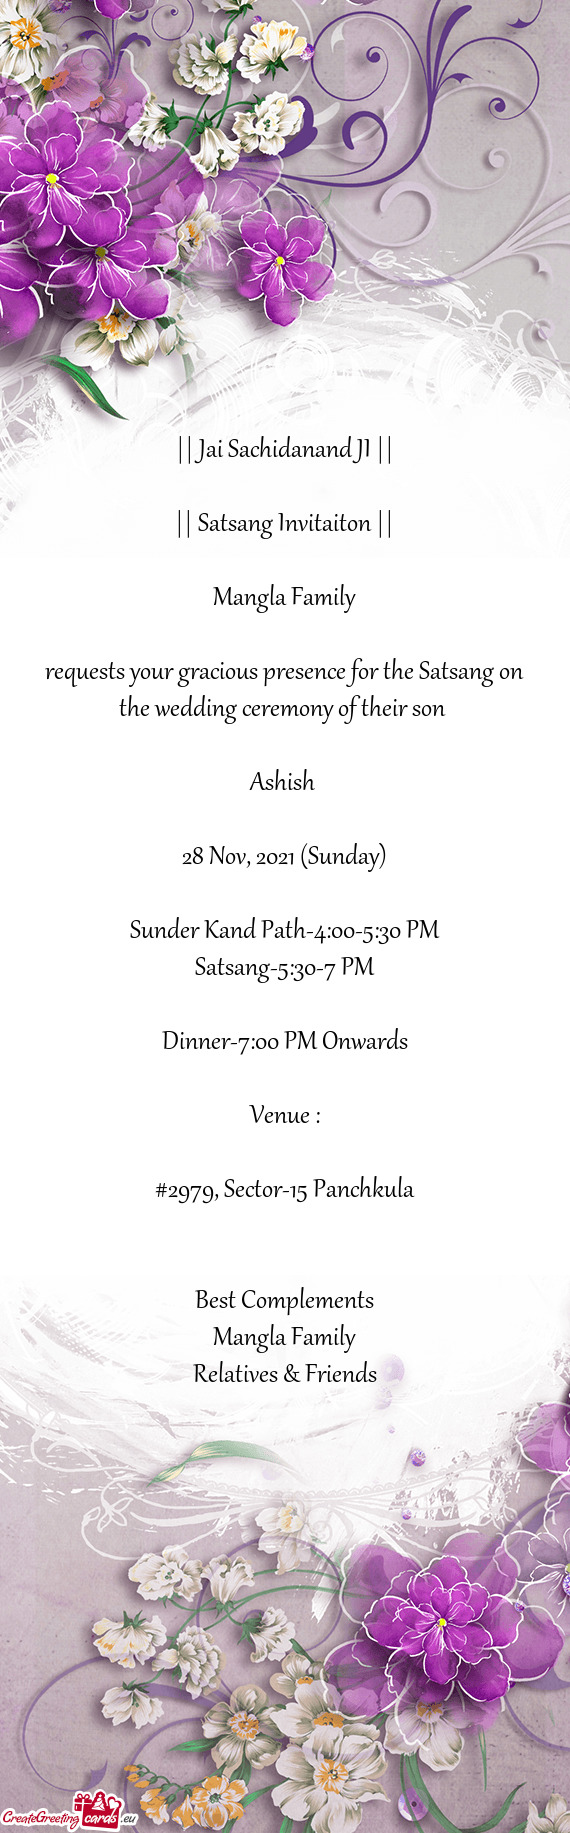 Requests your gracious presence for the Satsang on the wedding ceremony of their son